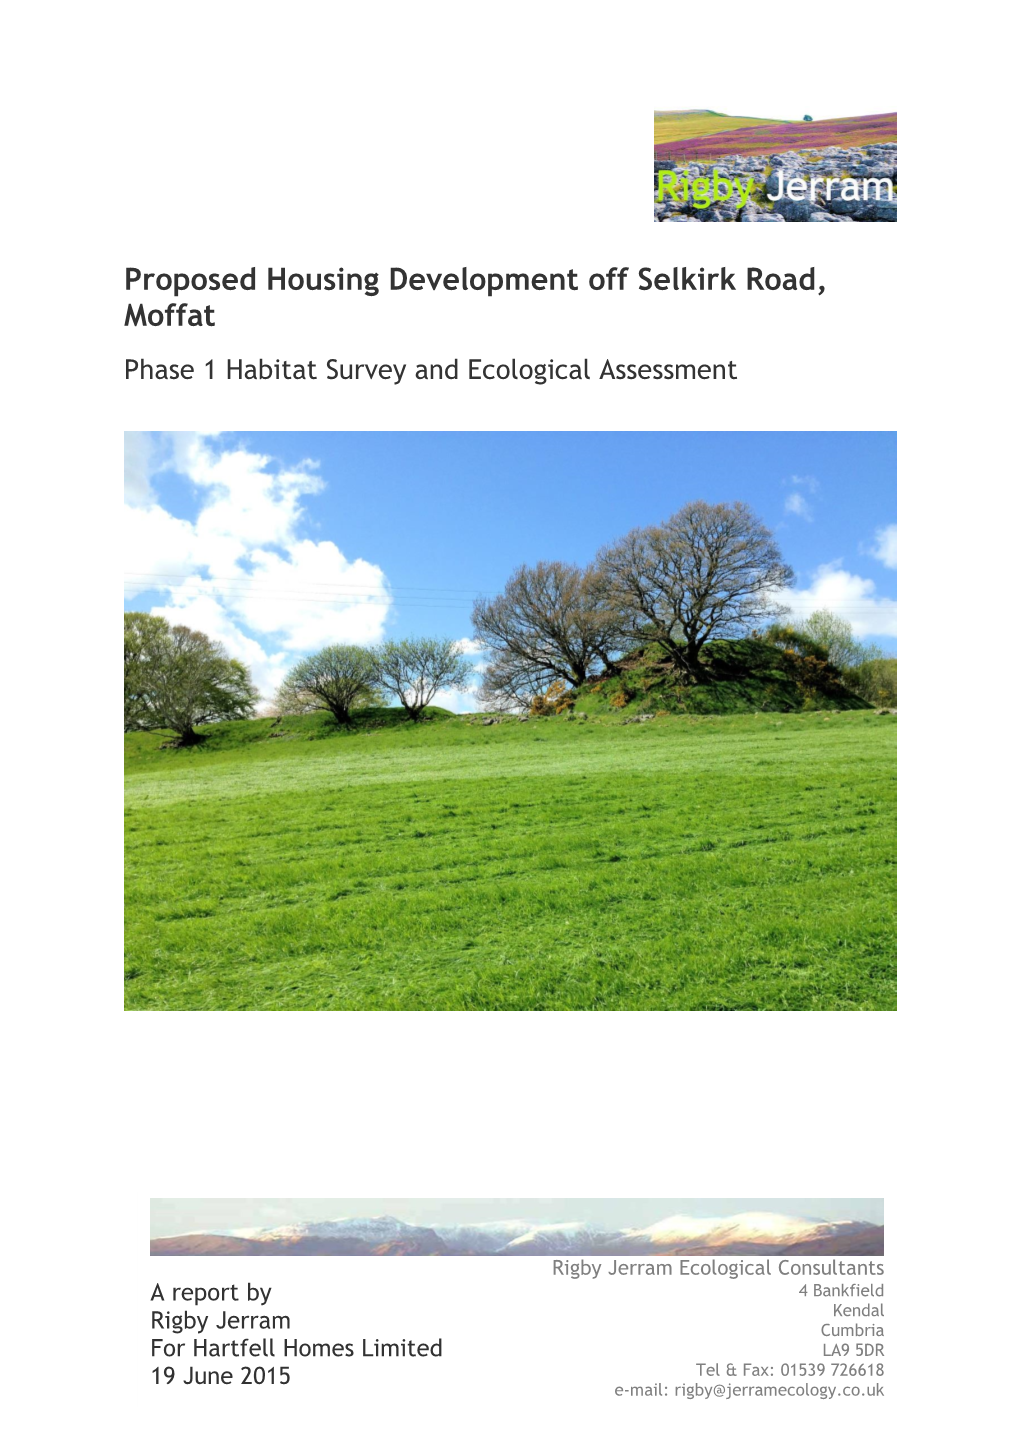 Selkirk Road, Moffat Phase 1 Habitat Survey and Ecological Assessment